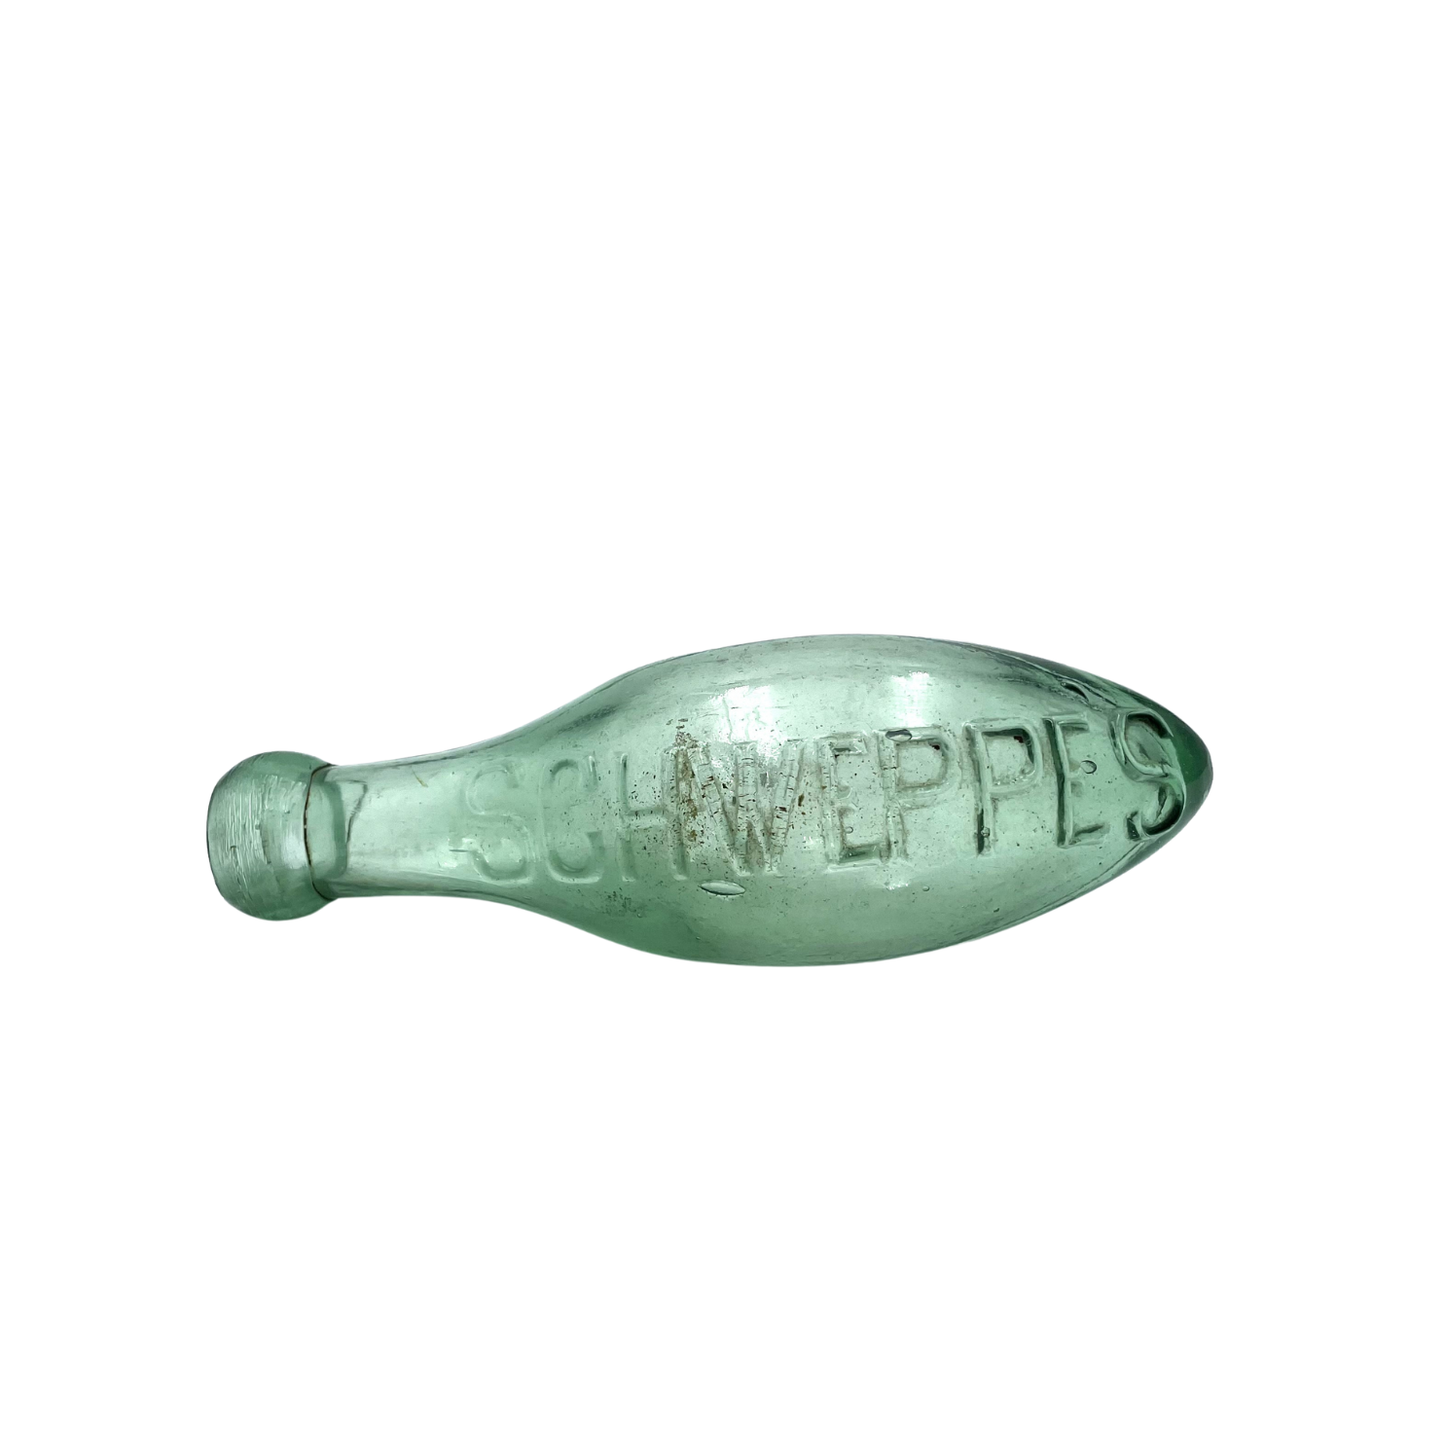 Antique Shweppe's Aerated Water Torpedo Bottle - 18cm